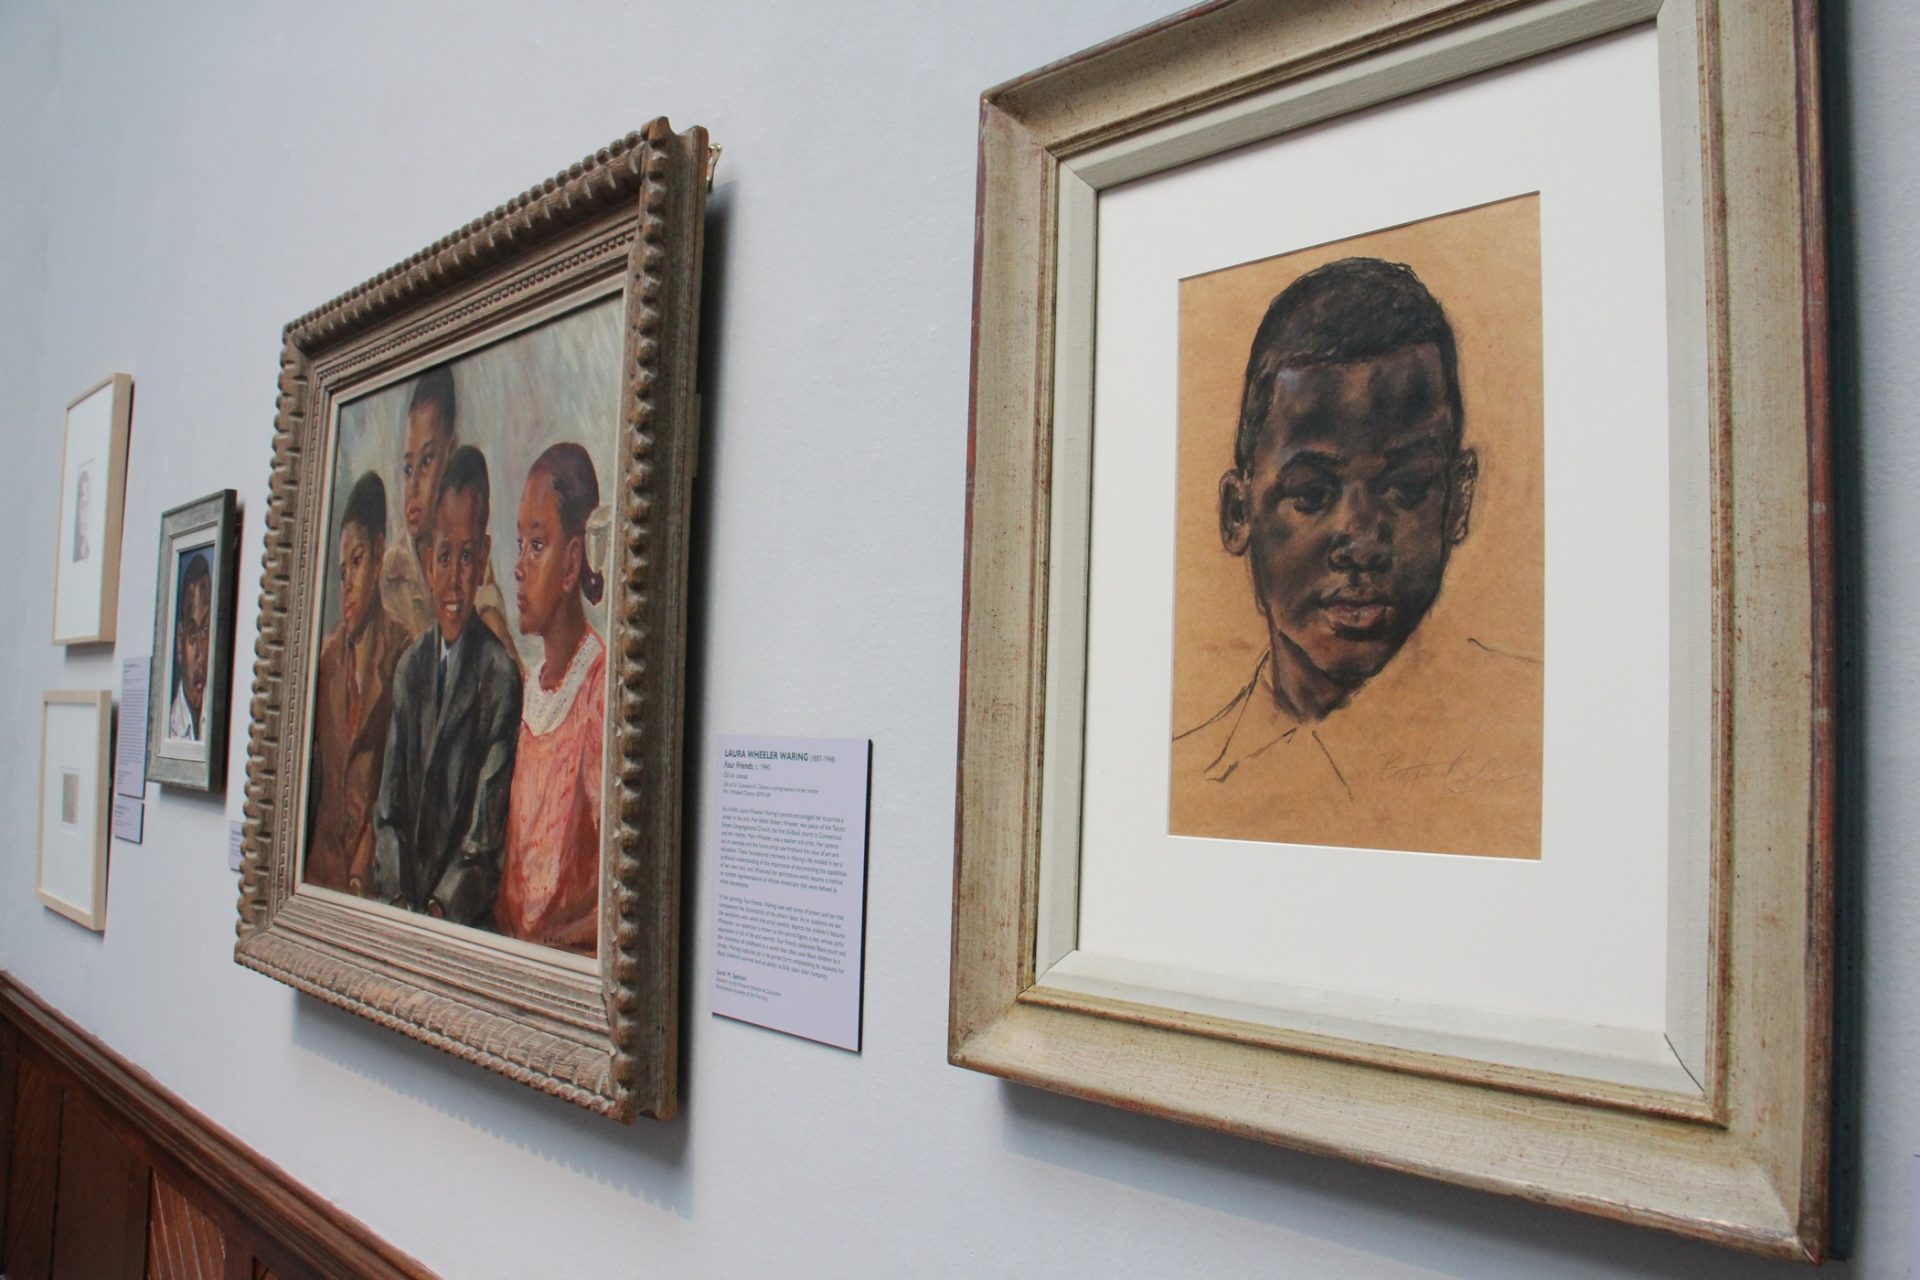 This charcoal and pastel portrait of a boy, an early work by Barkley L. Hendricks, is one of many depictions of African American children and family life in Constance Clayton's collection.